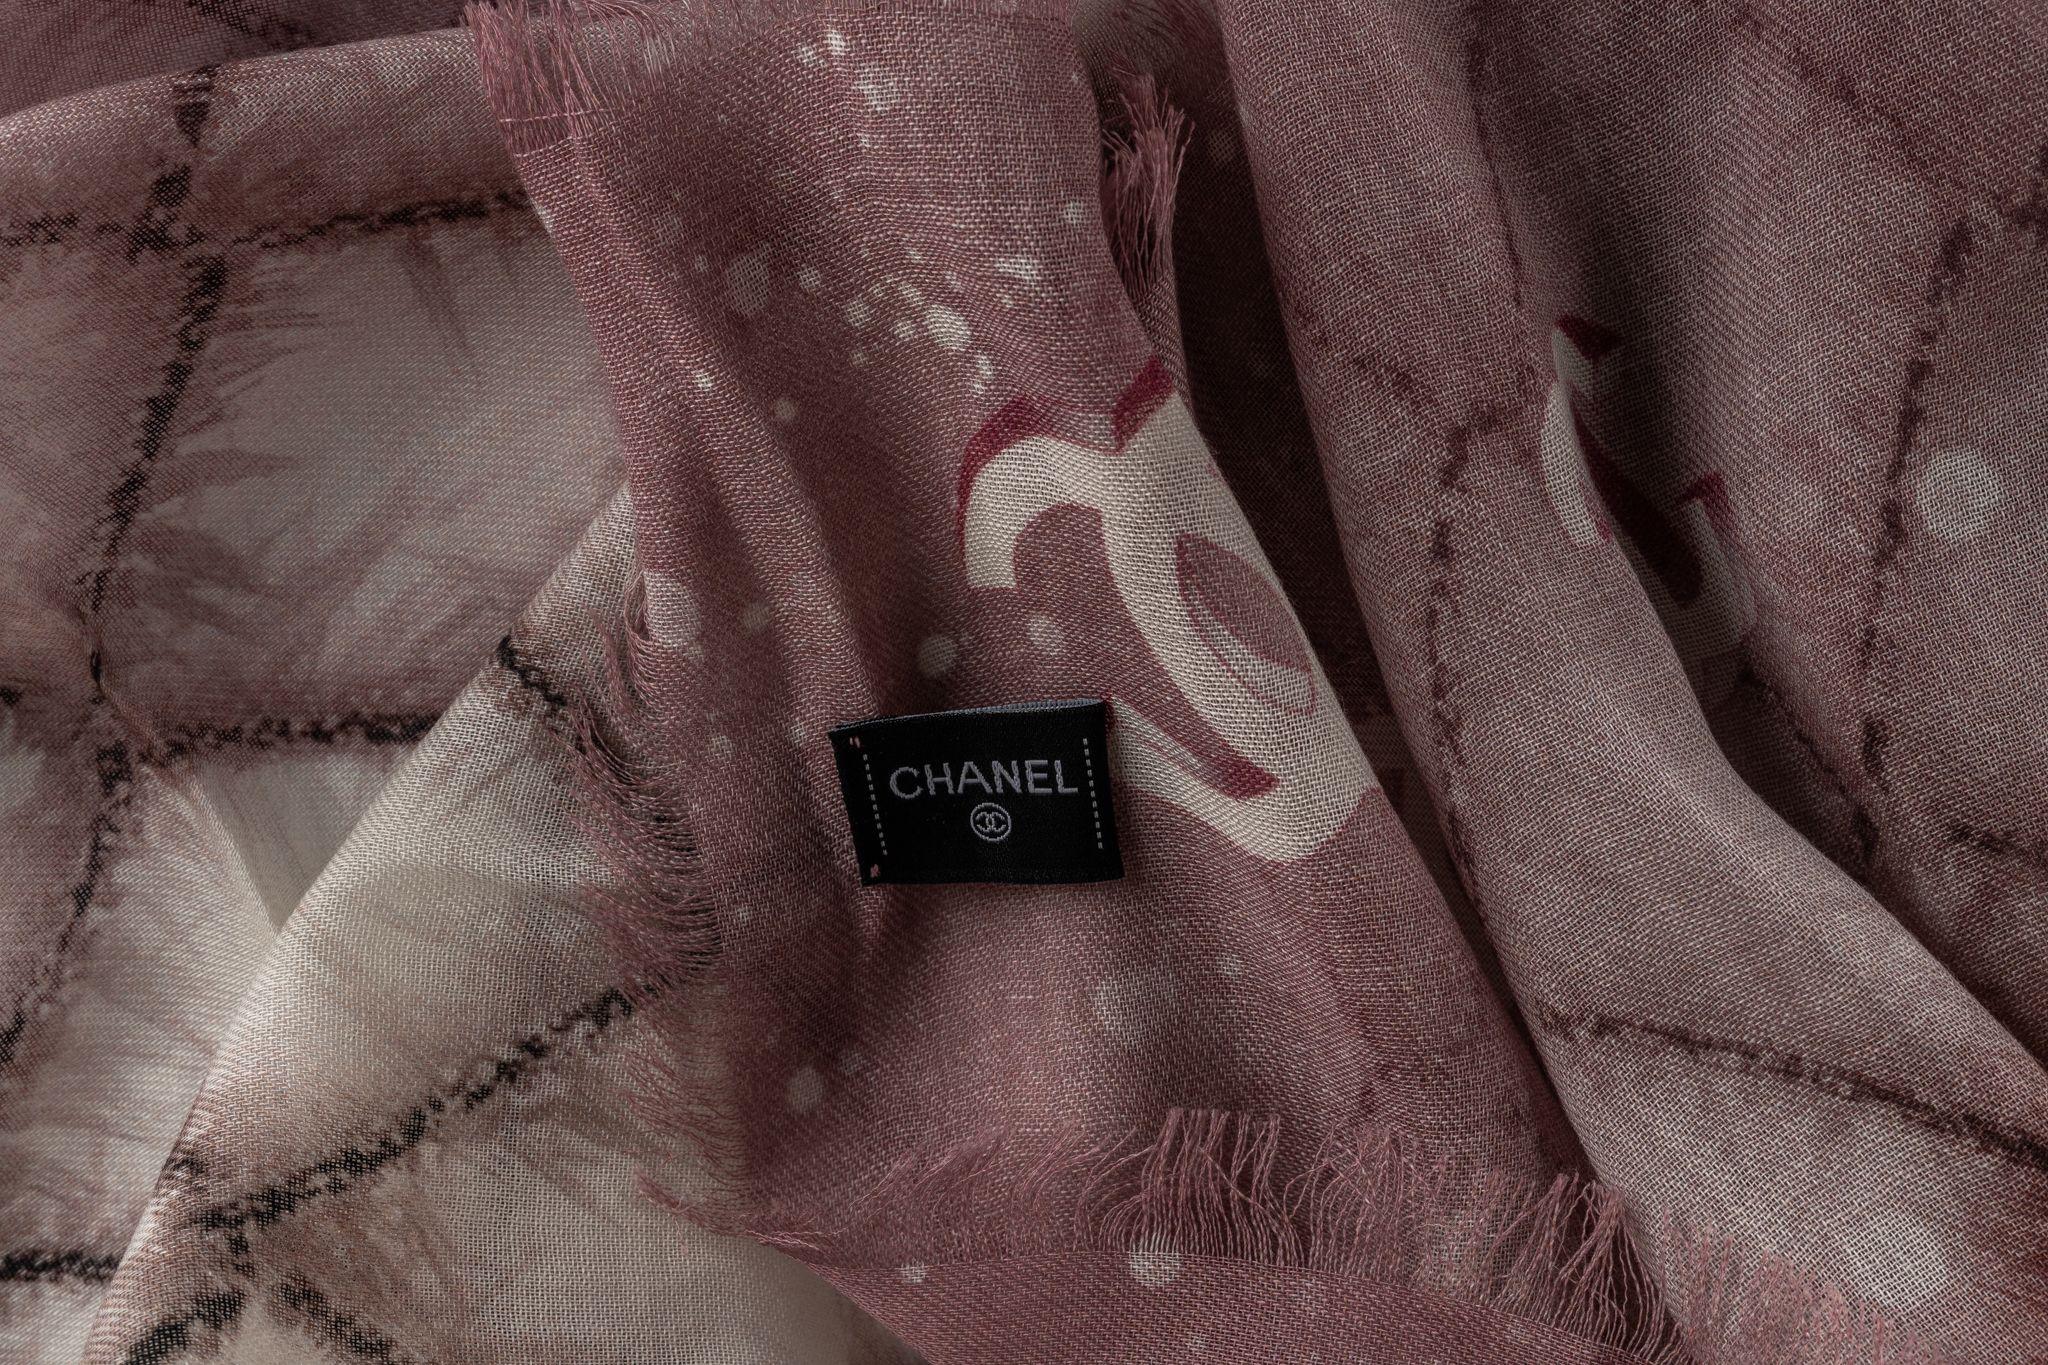 Chanel cashmere shawl in Rosé and Beige. The pattern features a checkered design in beige while it's framed with a rose tone. The item is in newt condition.